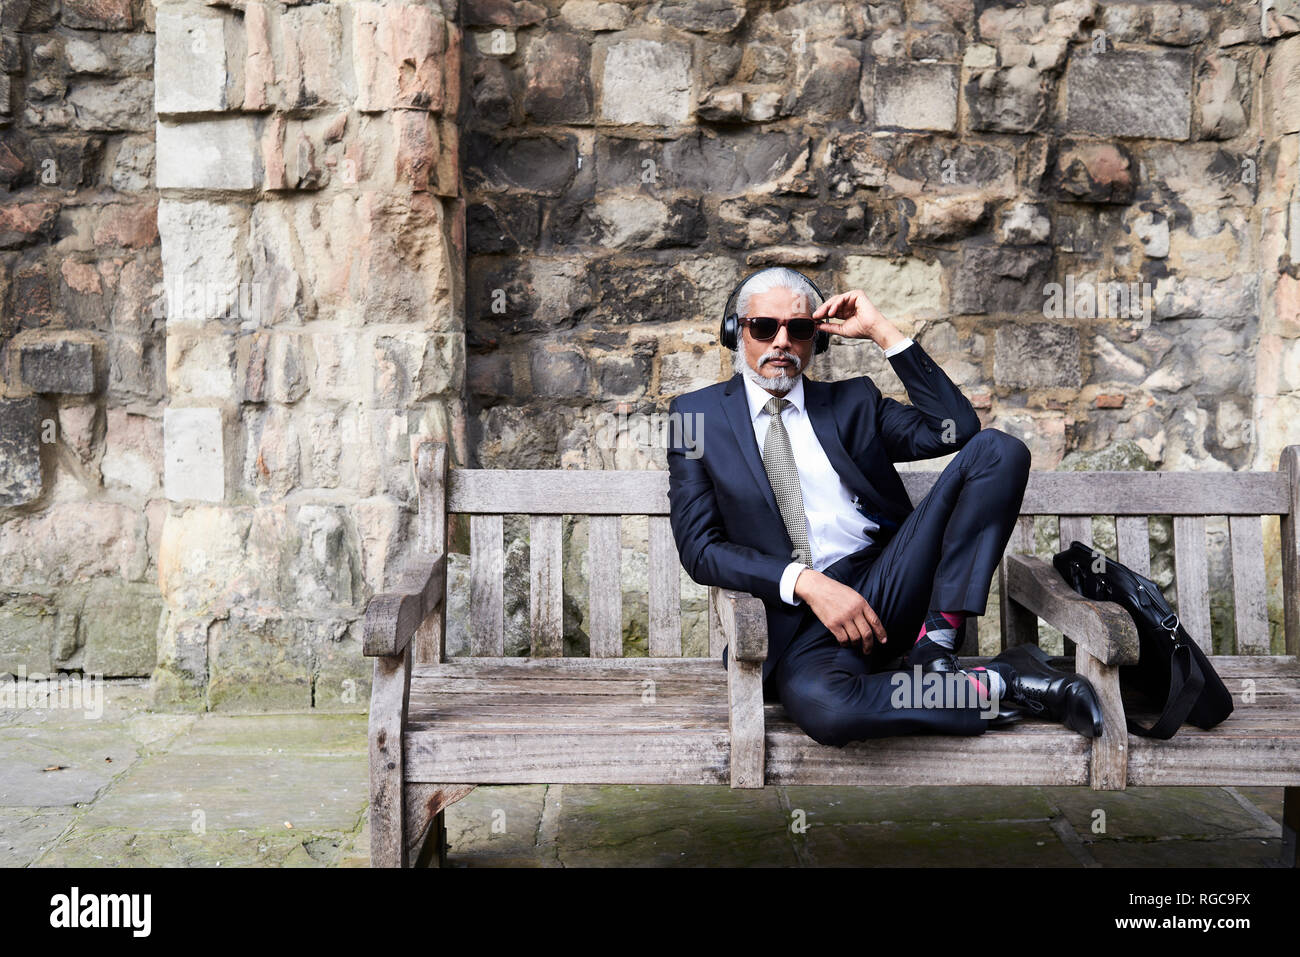 Portrait of well-dressed senior businessman with sunglasses and headphones sitting on bench Stock Photo